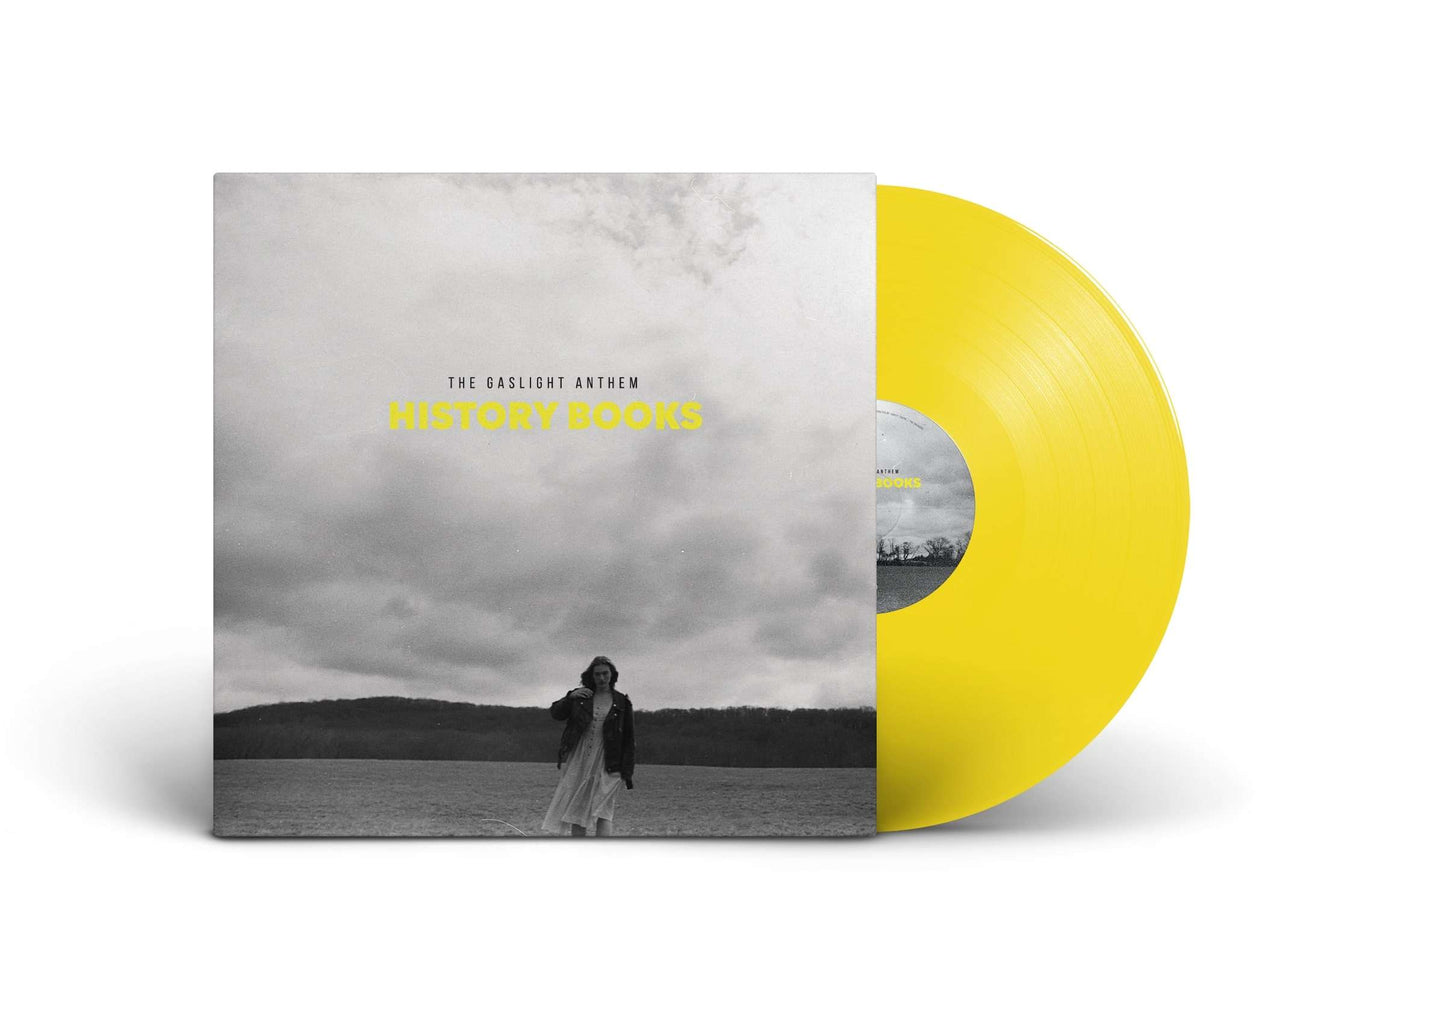 The Gaslight Anthem: History Books (Indie Exclusive Vinyl) (Canary Yellow Vinyl) (Limited Edition) Uk import